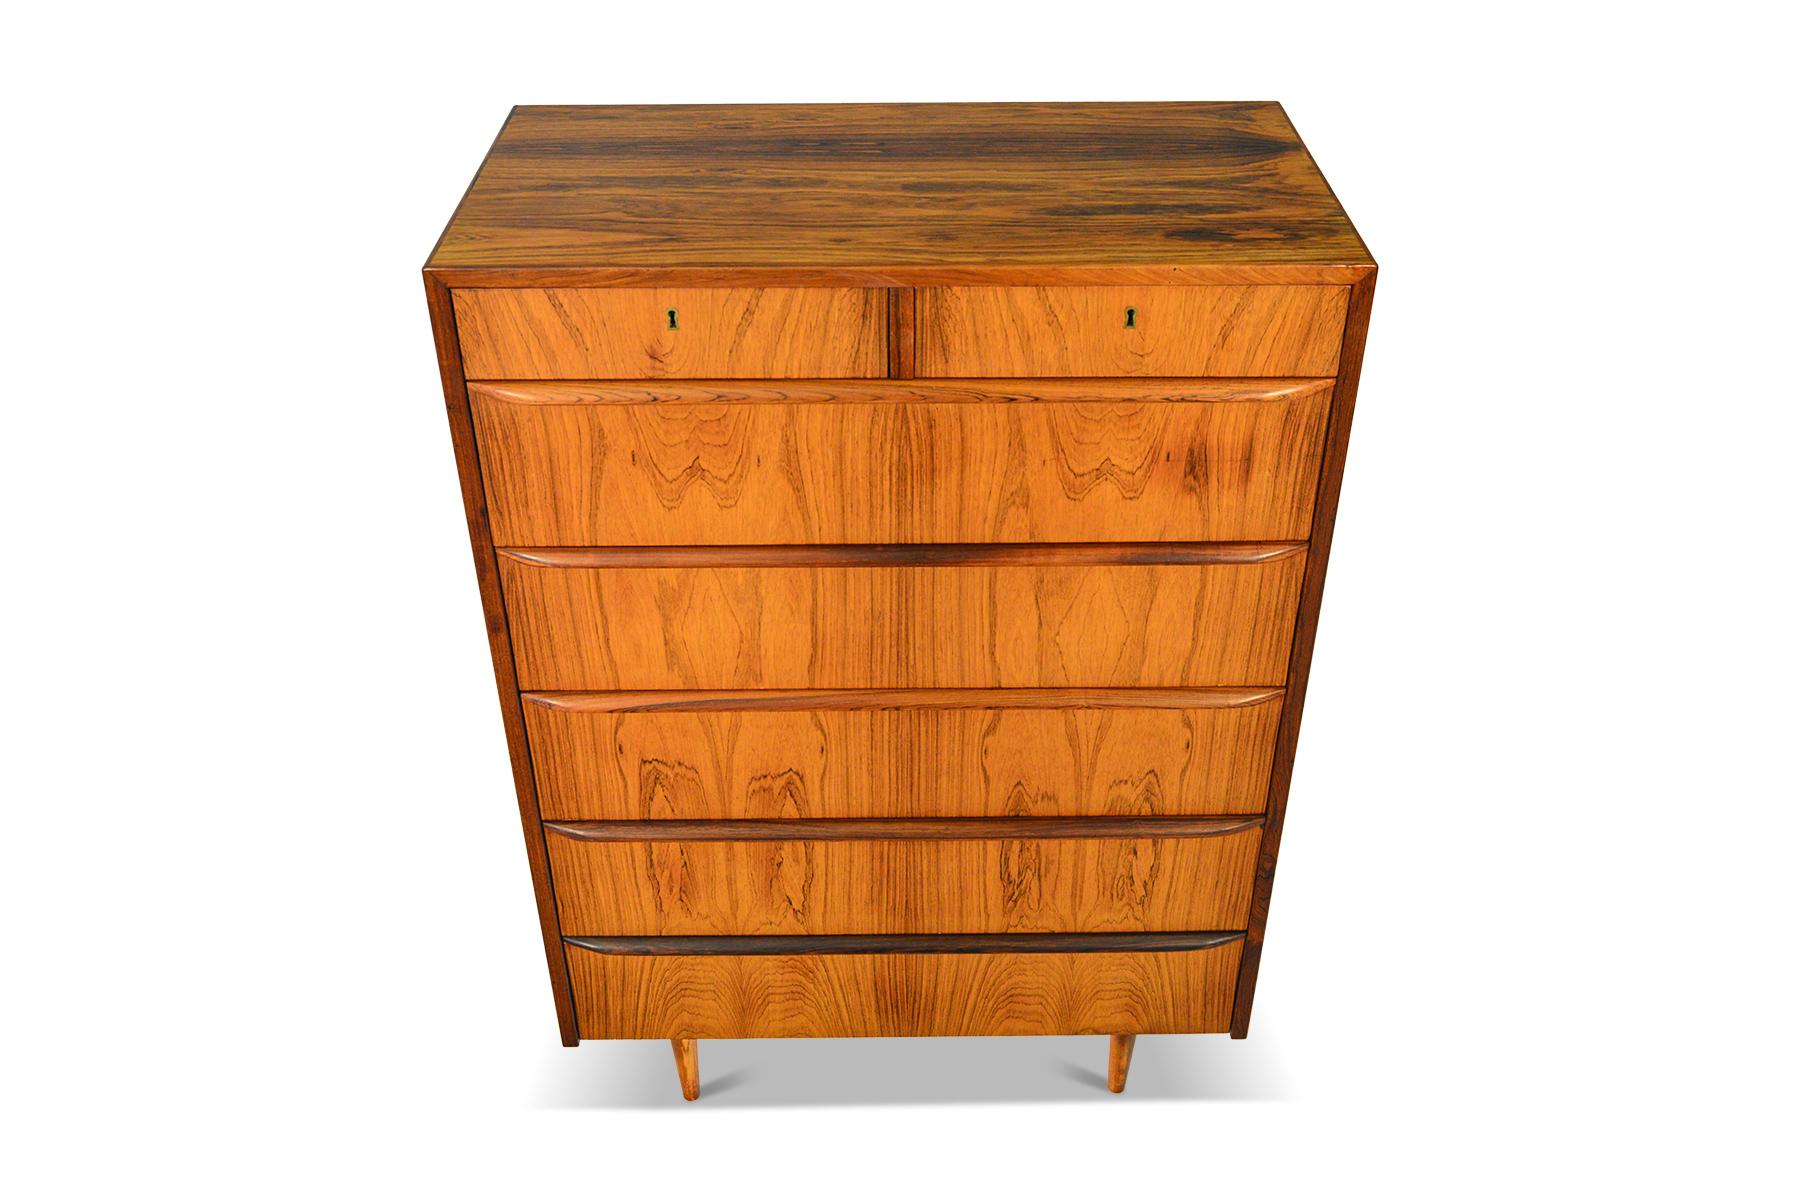 This gorgeous Danish modern seven drawer mid century rosewood dresser offers an elegant storage solution. Top drawers are split and accessible by key. Rich woodgrain and high quality construction define this classic piece. In excellent original